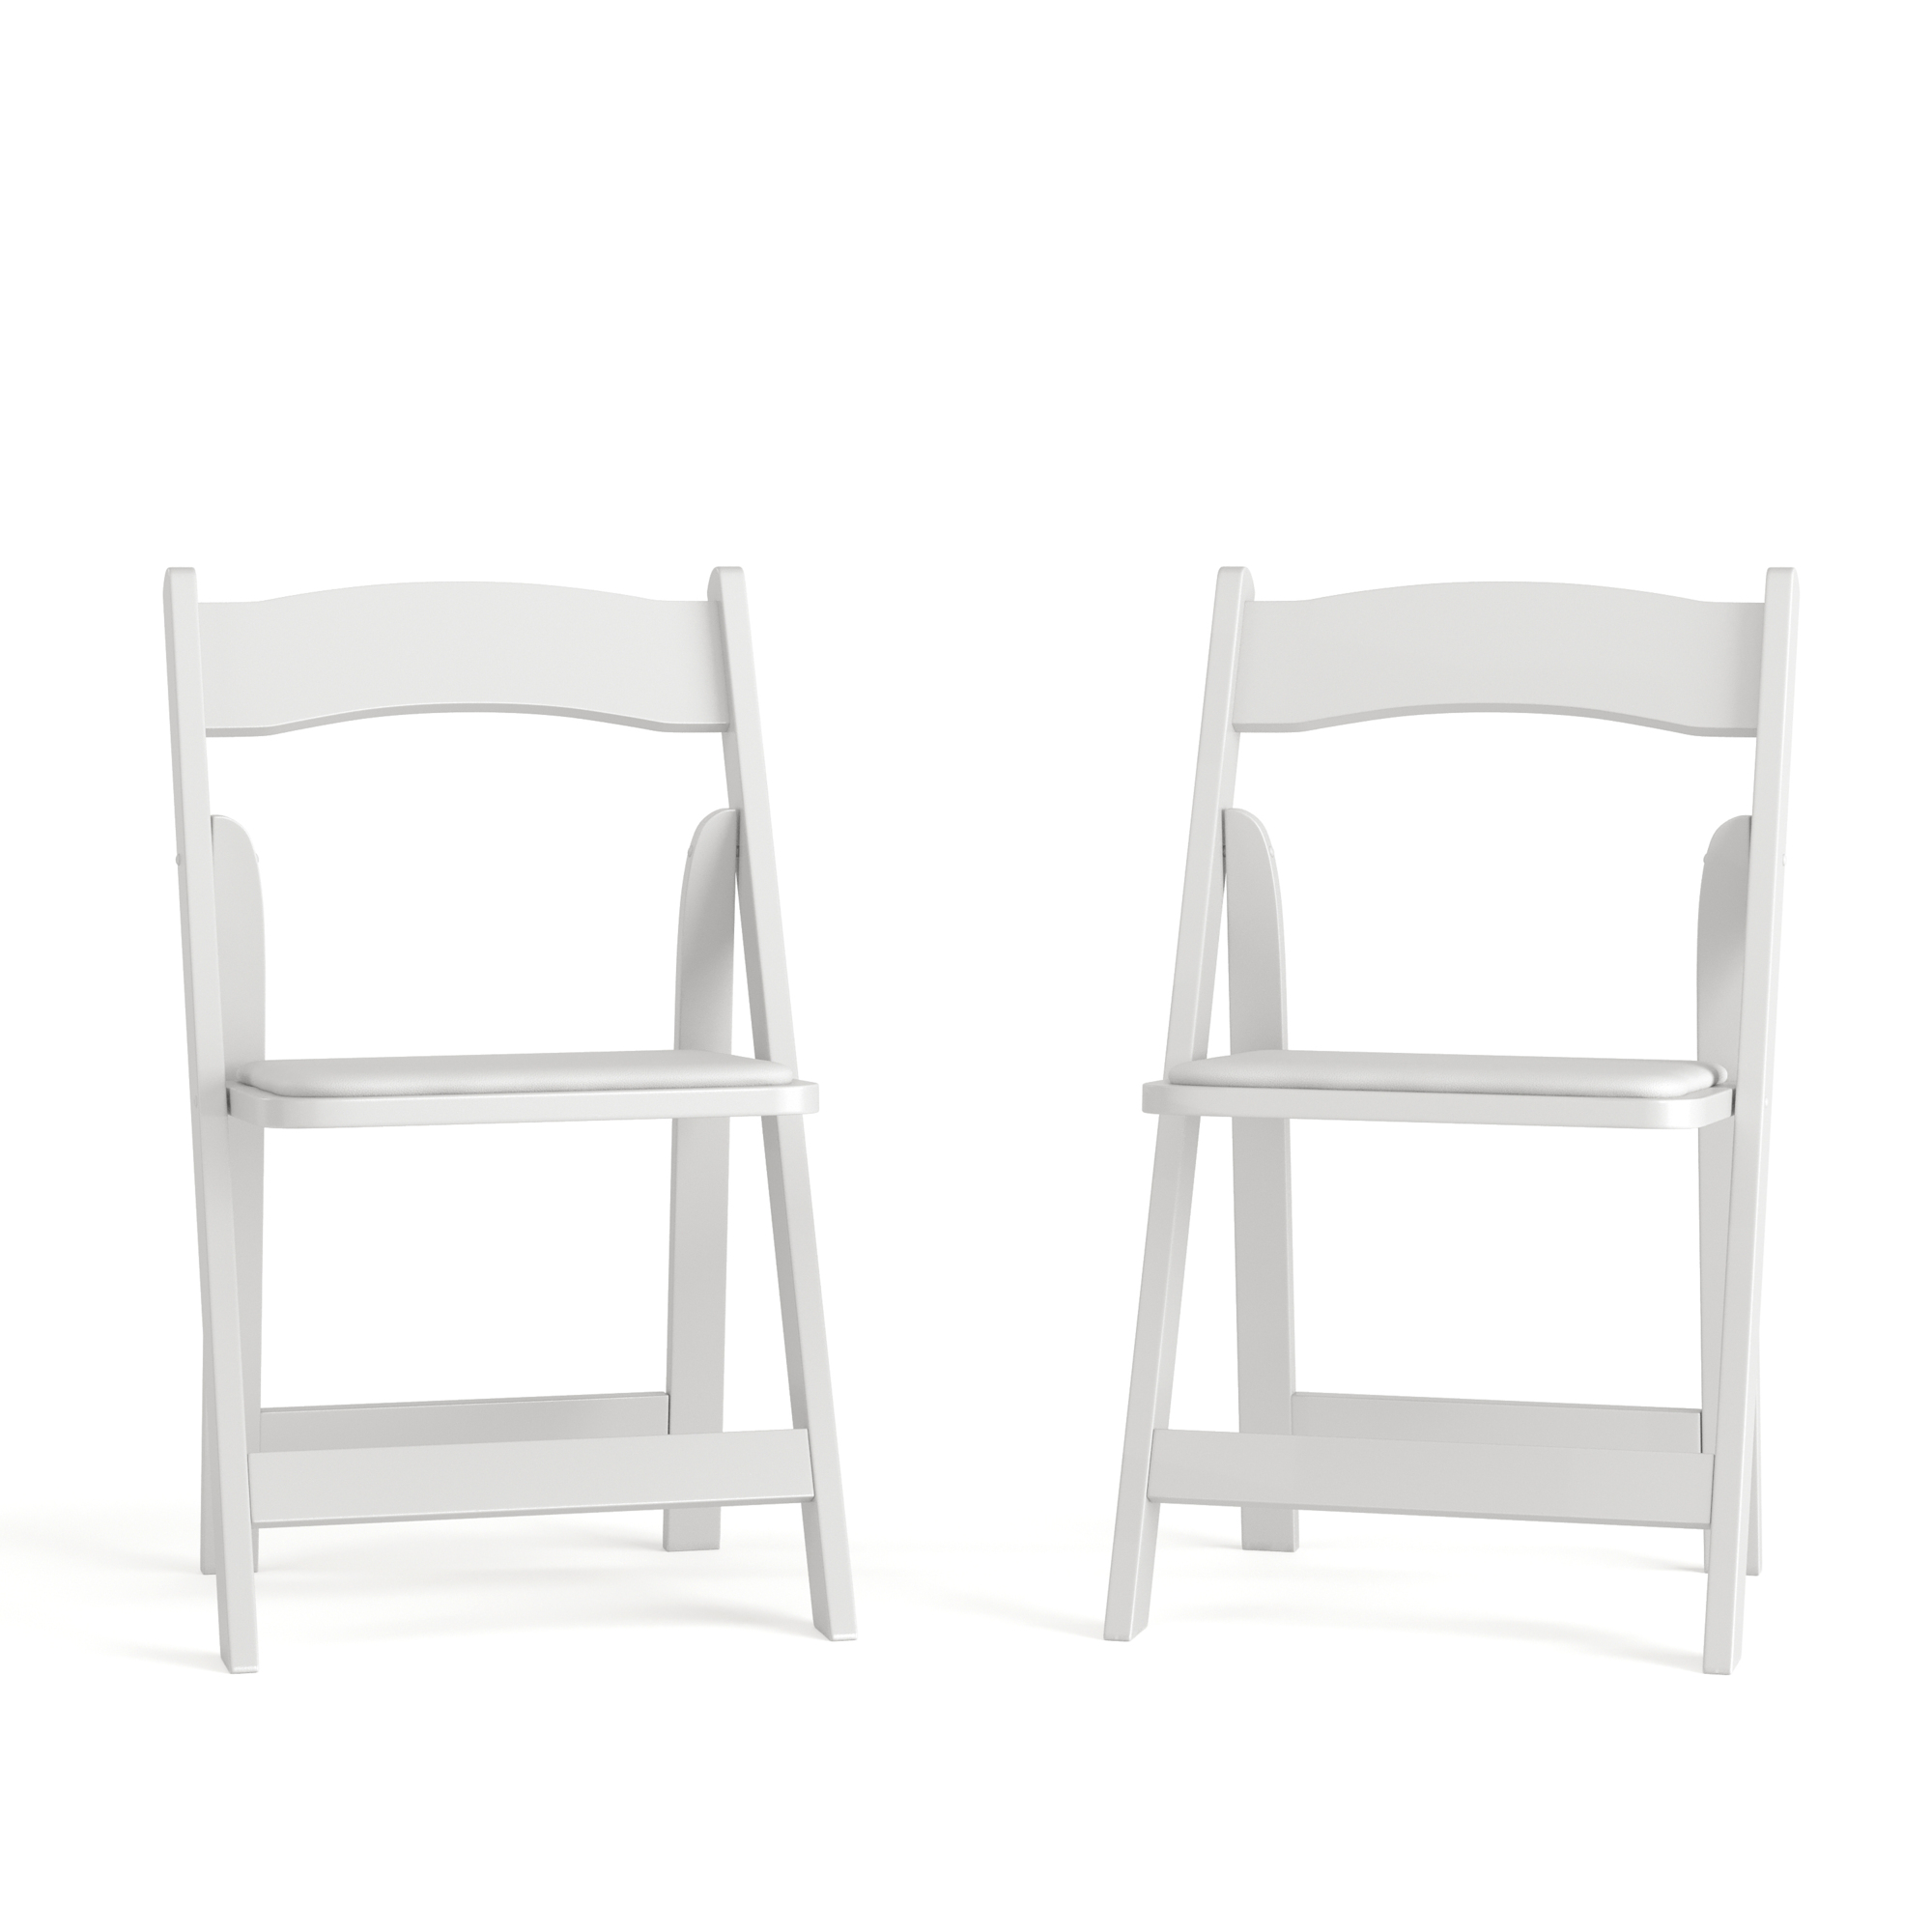 Flash Furniture, 2PK White Wood Folding Chair w/ Vinyl Padded Seat, Primary Color White, Included (qty.) 2, Model 2XF2901WHWOOD